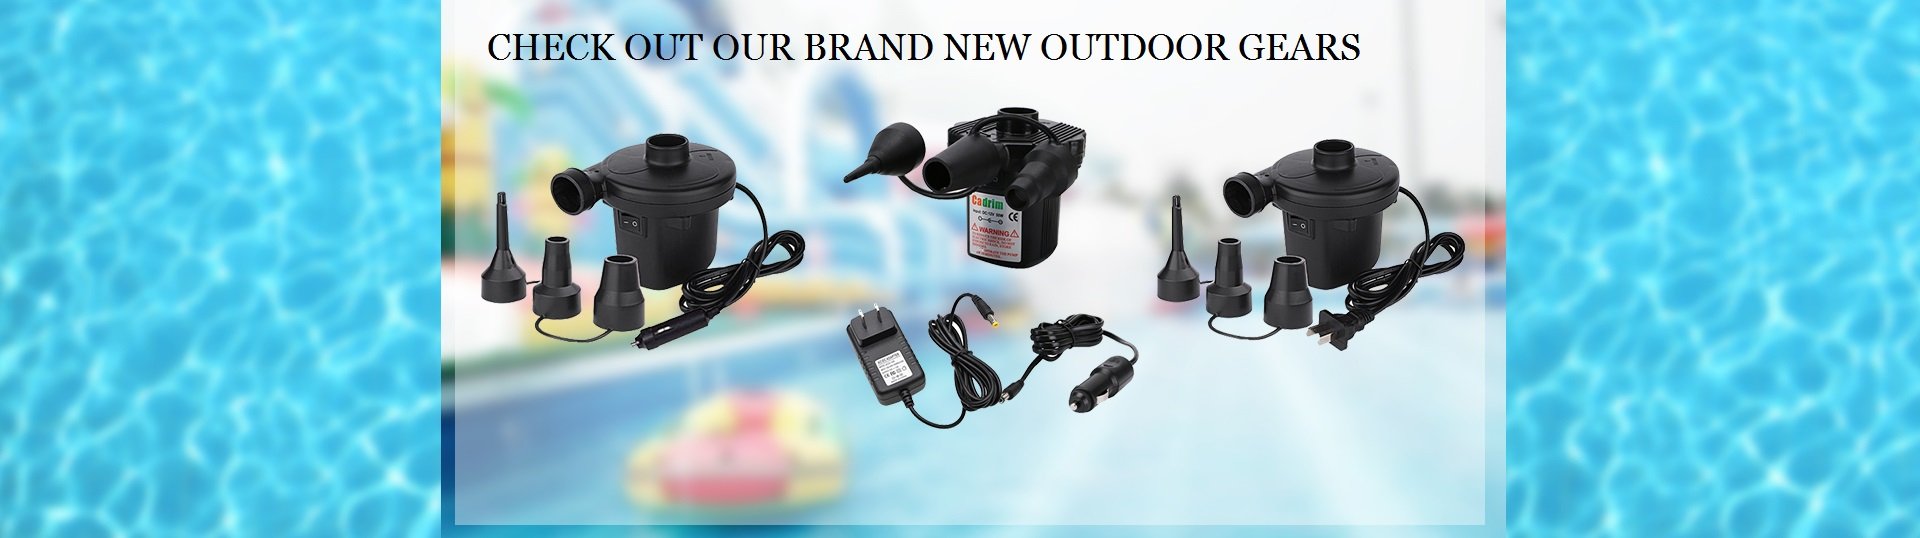 CHECK OUT OUR BRAND NEW OUTDOOR GEARS